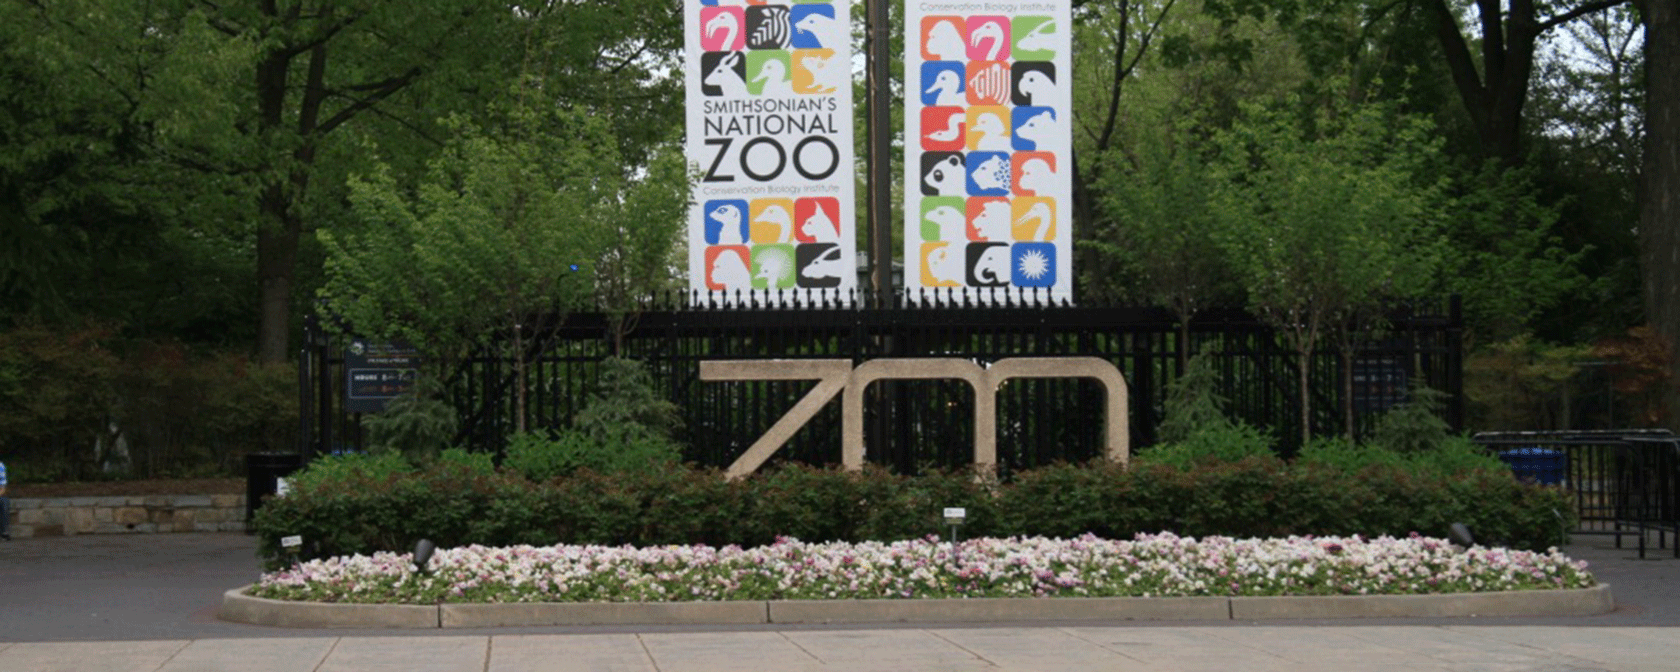 Zoo sign in Woodley Park